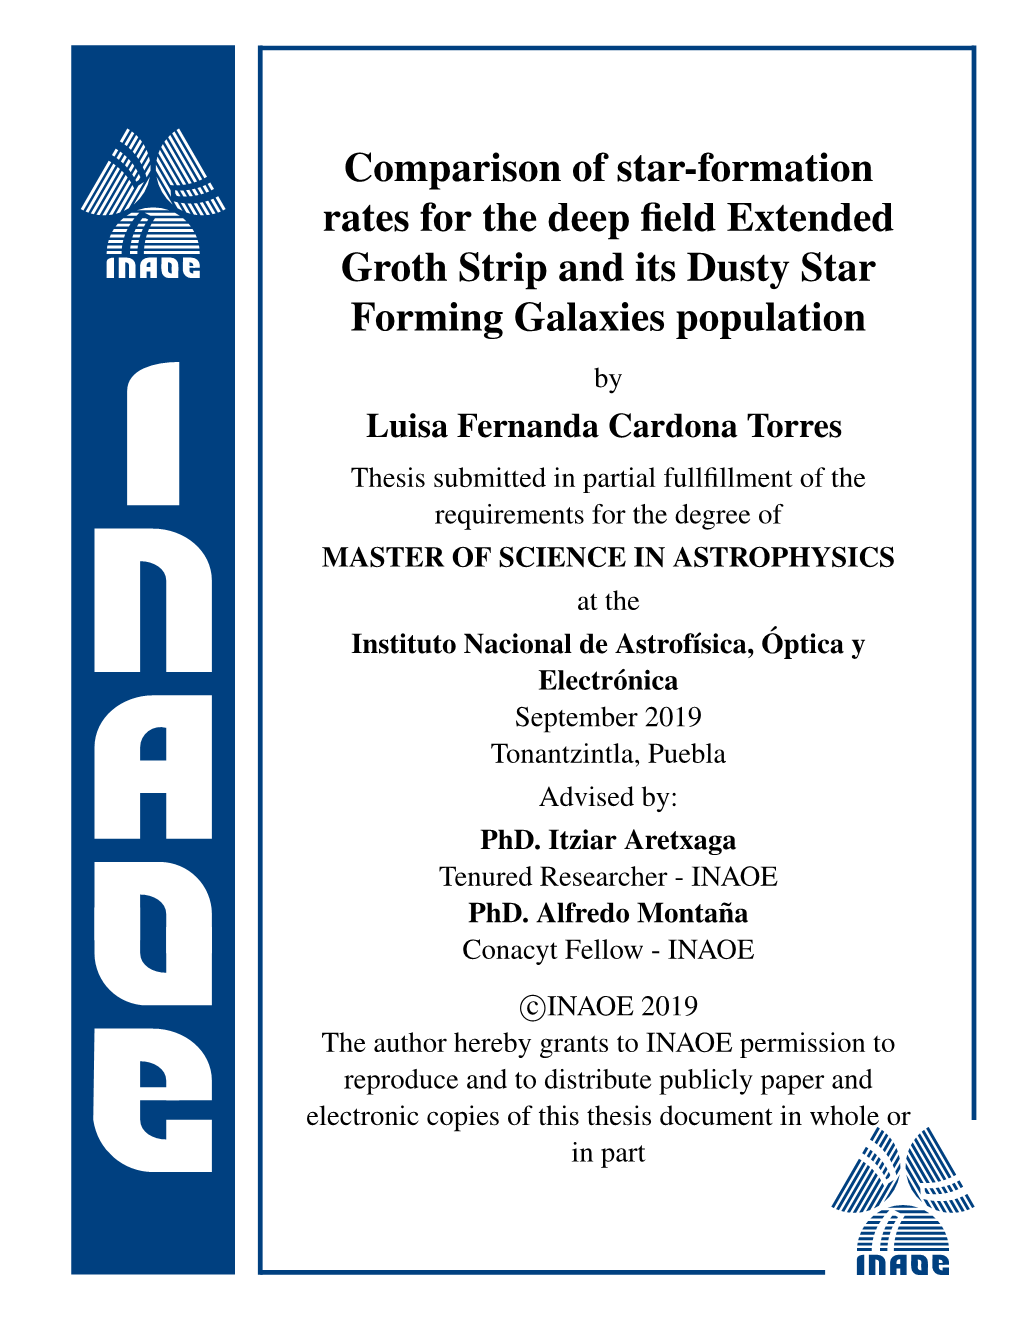 Comparison of Star-Formation Rates for the Deep Field Extended Groth Strip and Its Dusty Star Forming Galaxies Population